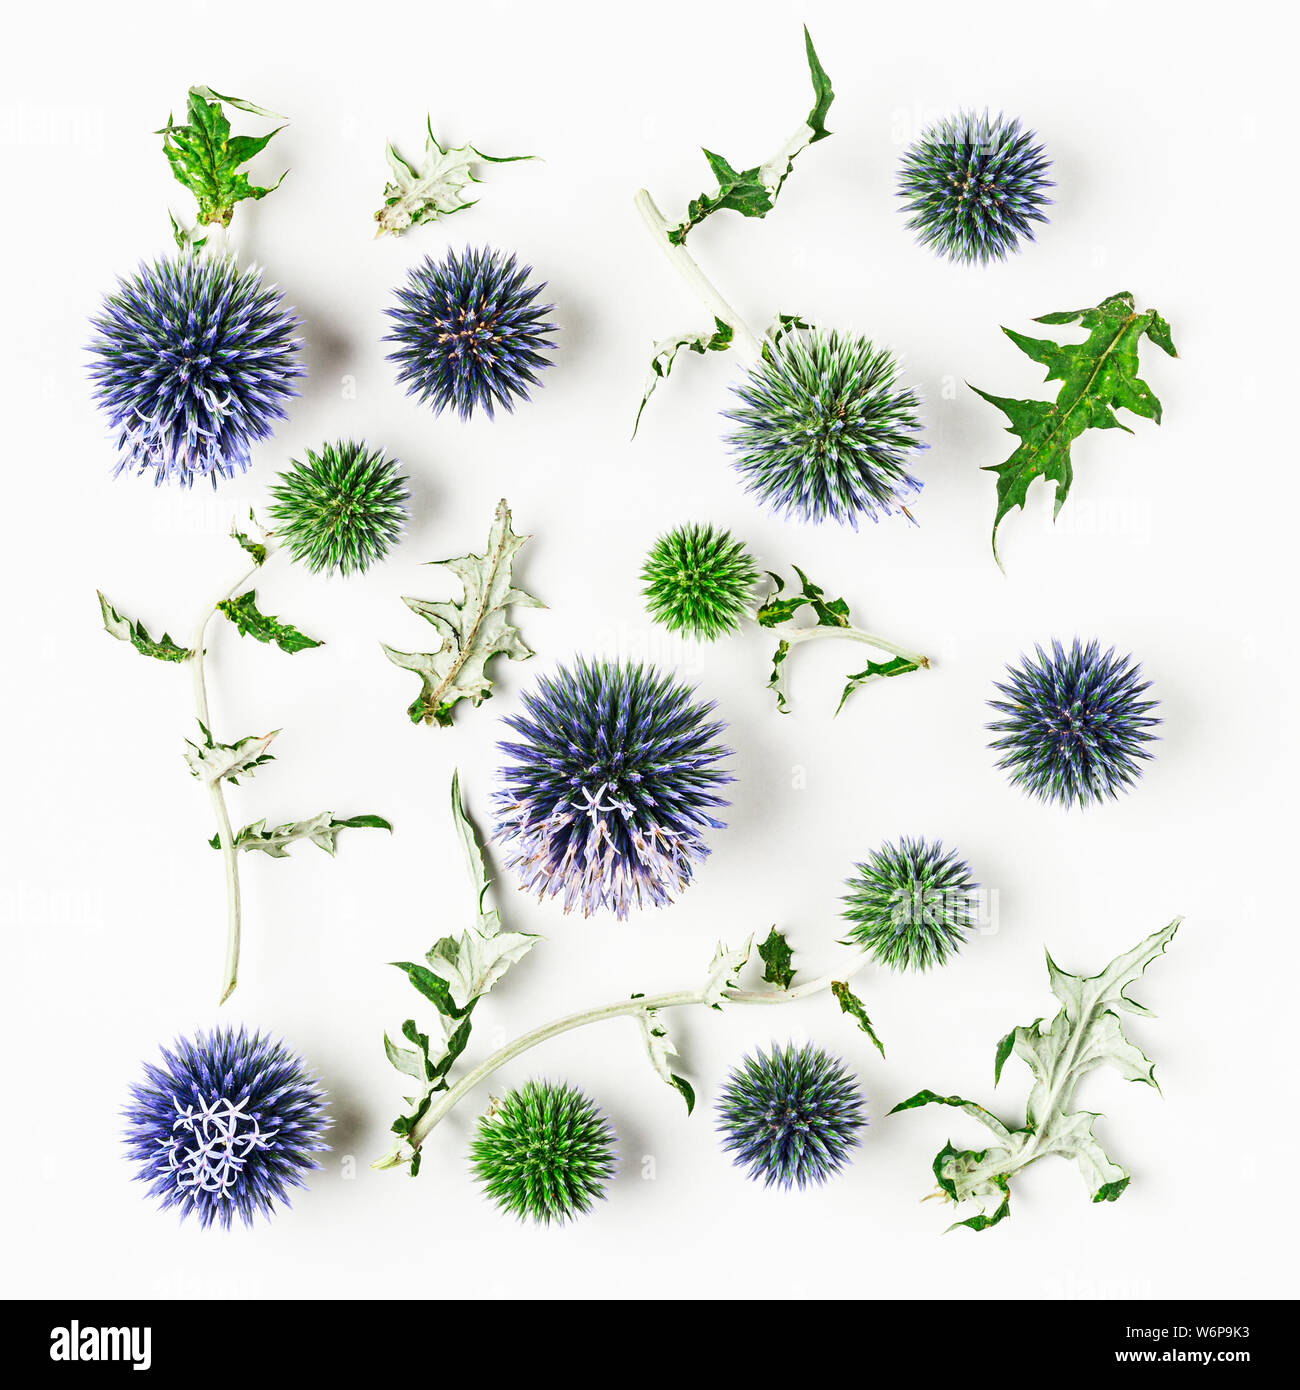 Blue thistle flowers and leaves composition. Flower arrangement on white background. Top view, flat lay. Floral design element Stock Photo